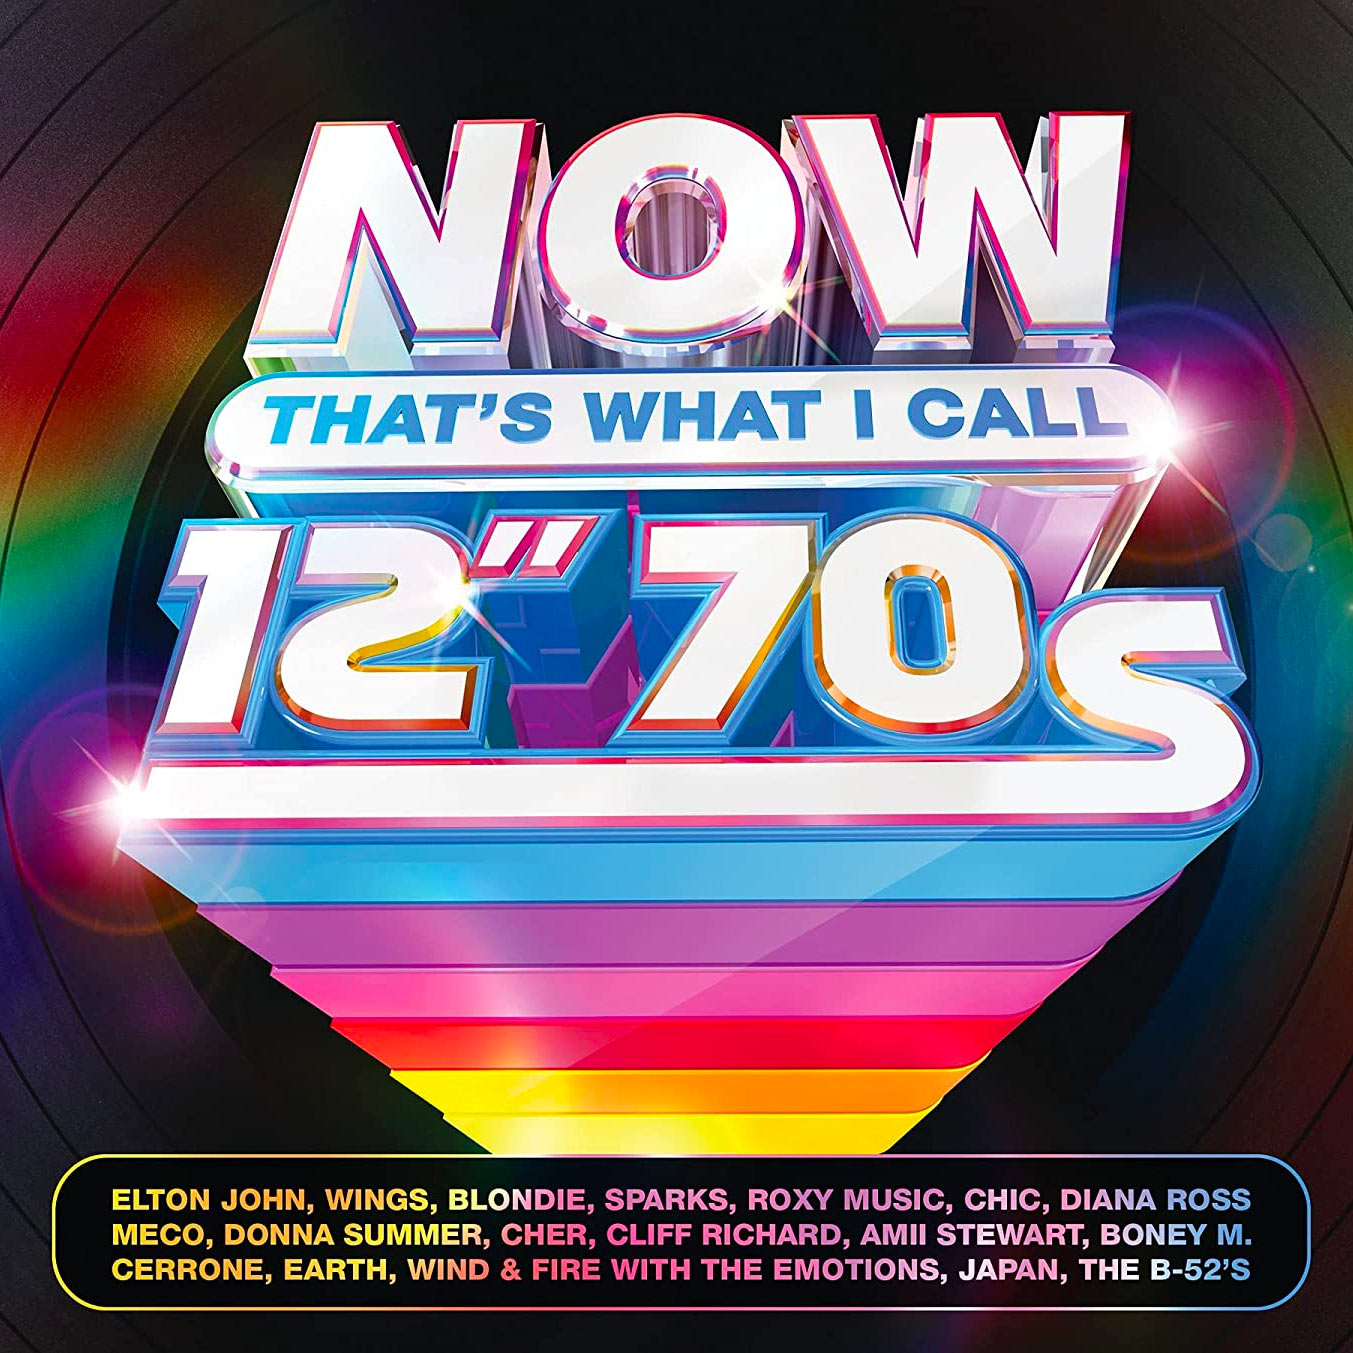 NOW That's What I Call Pop Gold (4CD) - NOW MUSIC Official Store